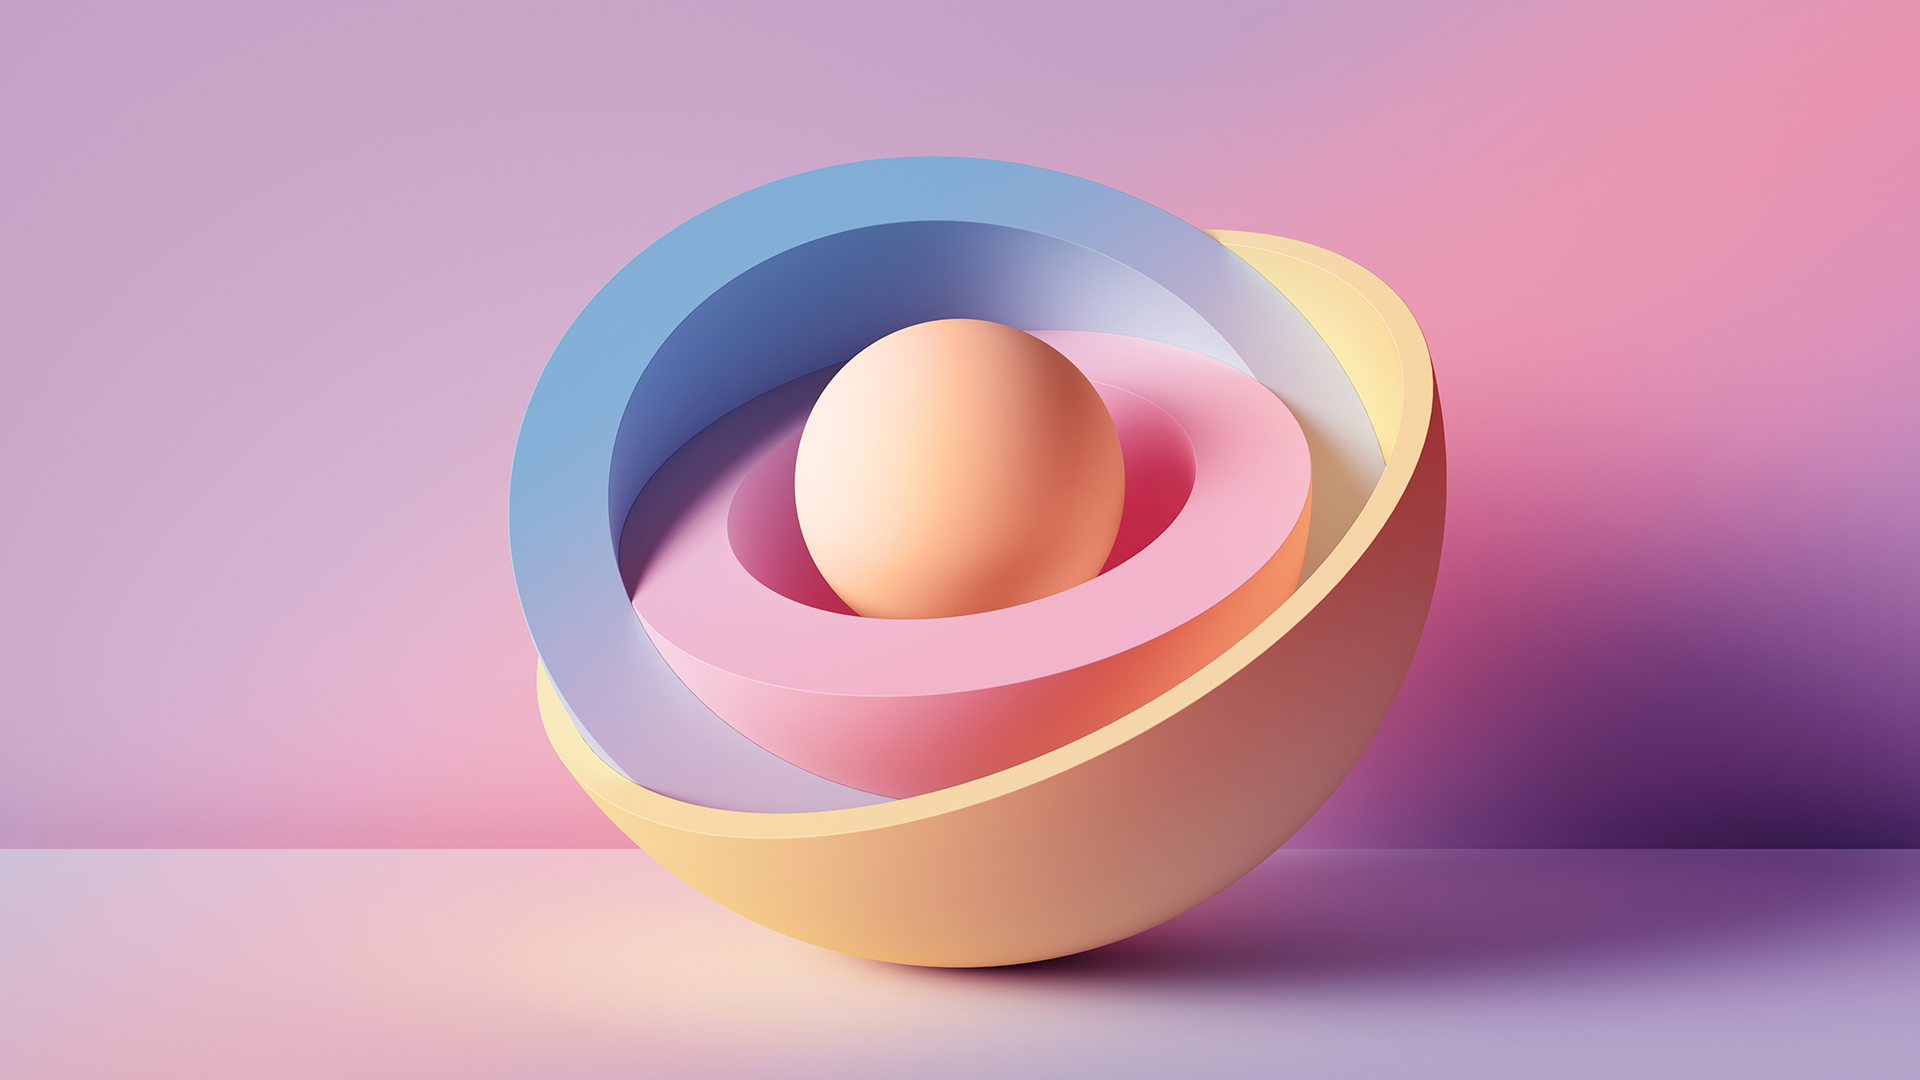 Three half spheres with one whole sphere in the centre